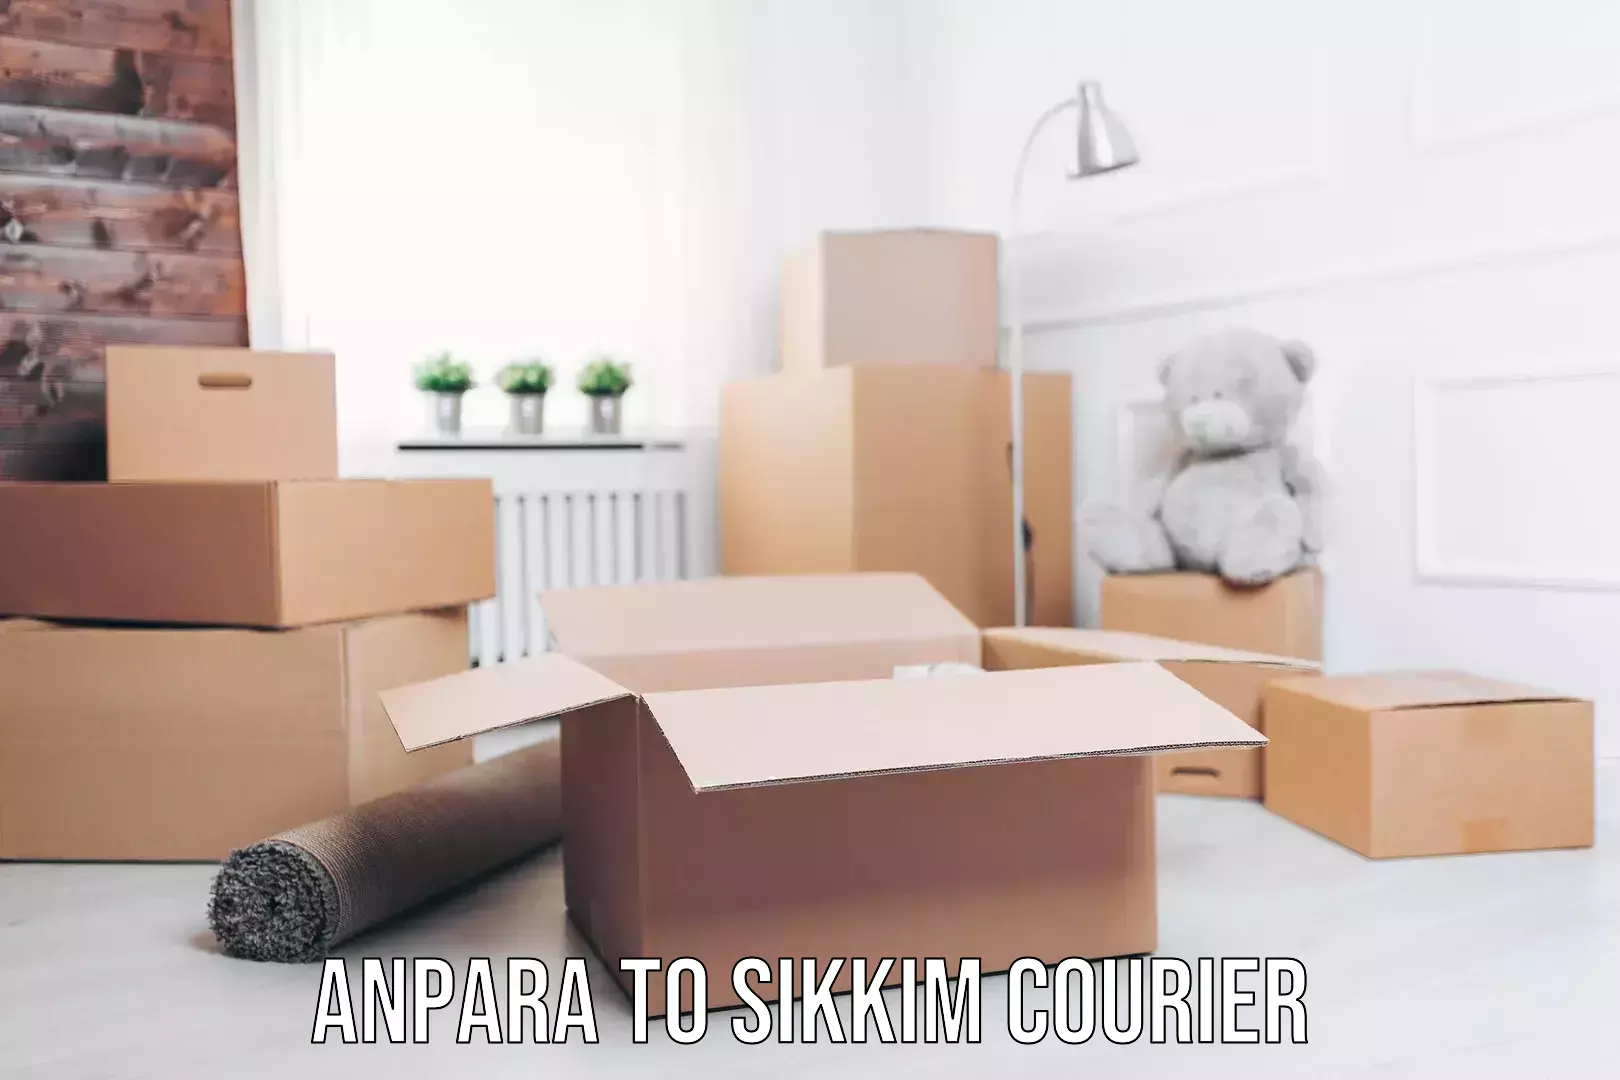 24/7 courier service Anpara to Sikkim